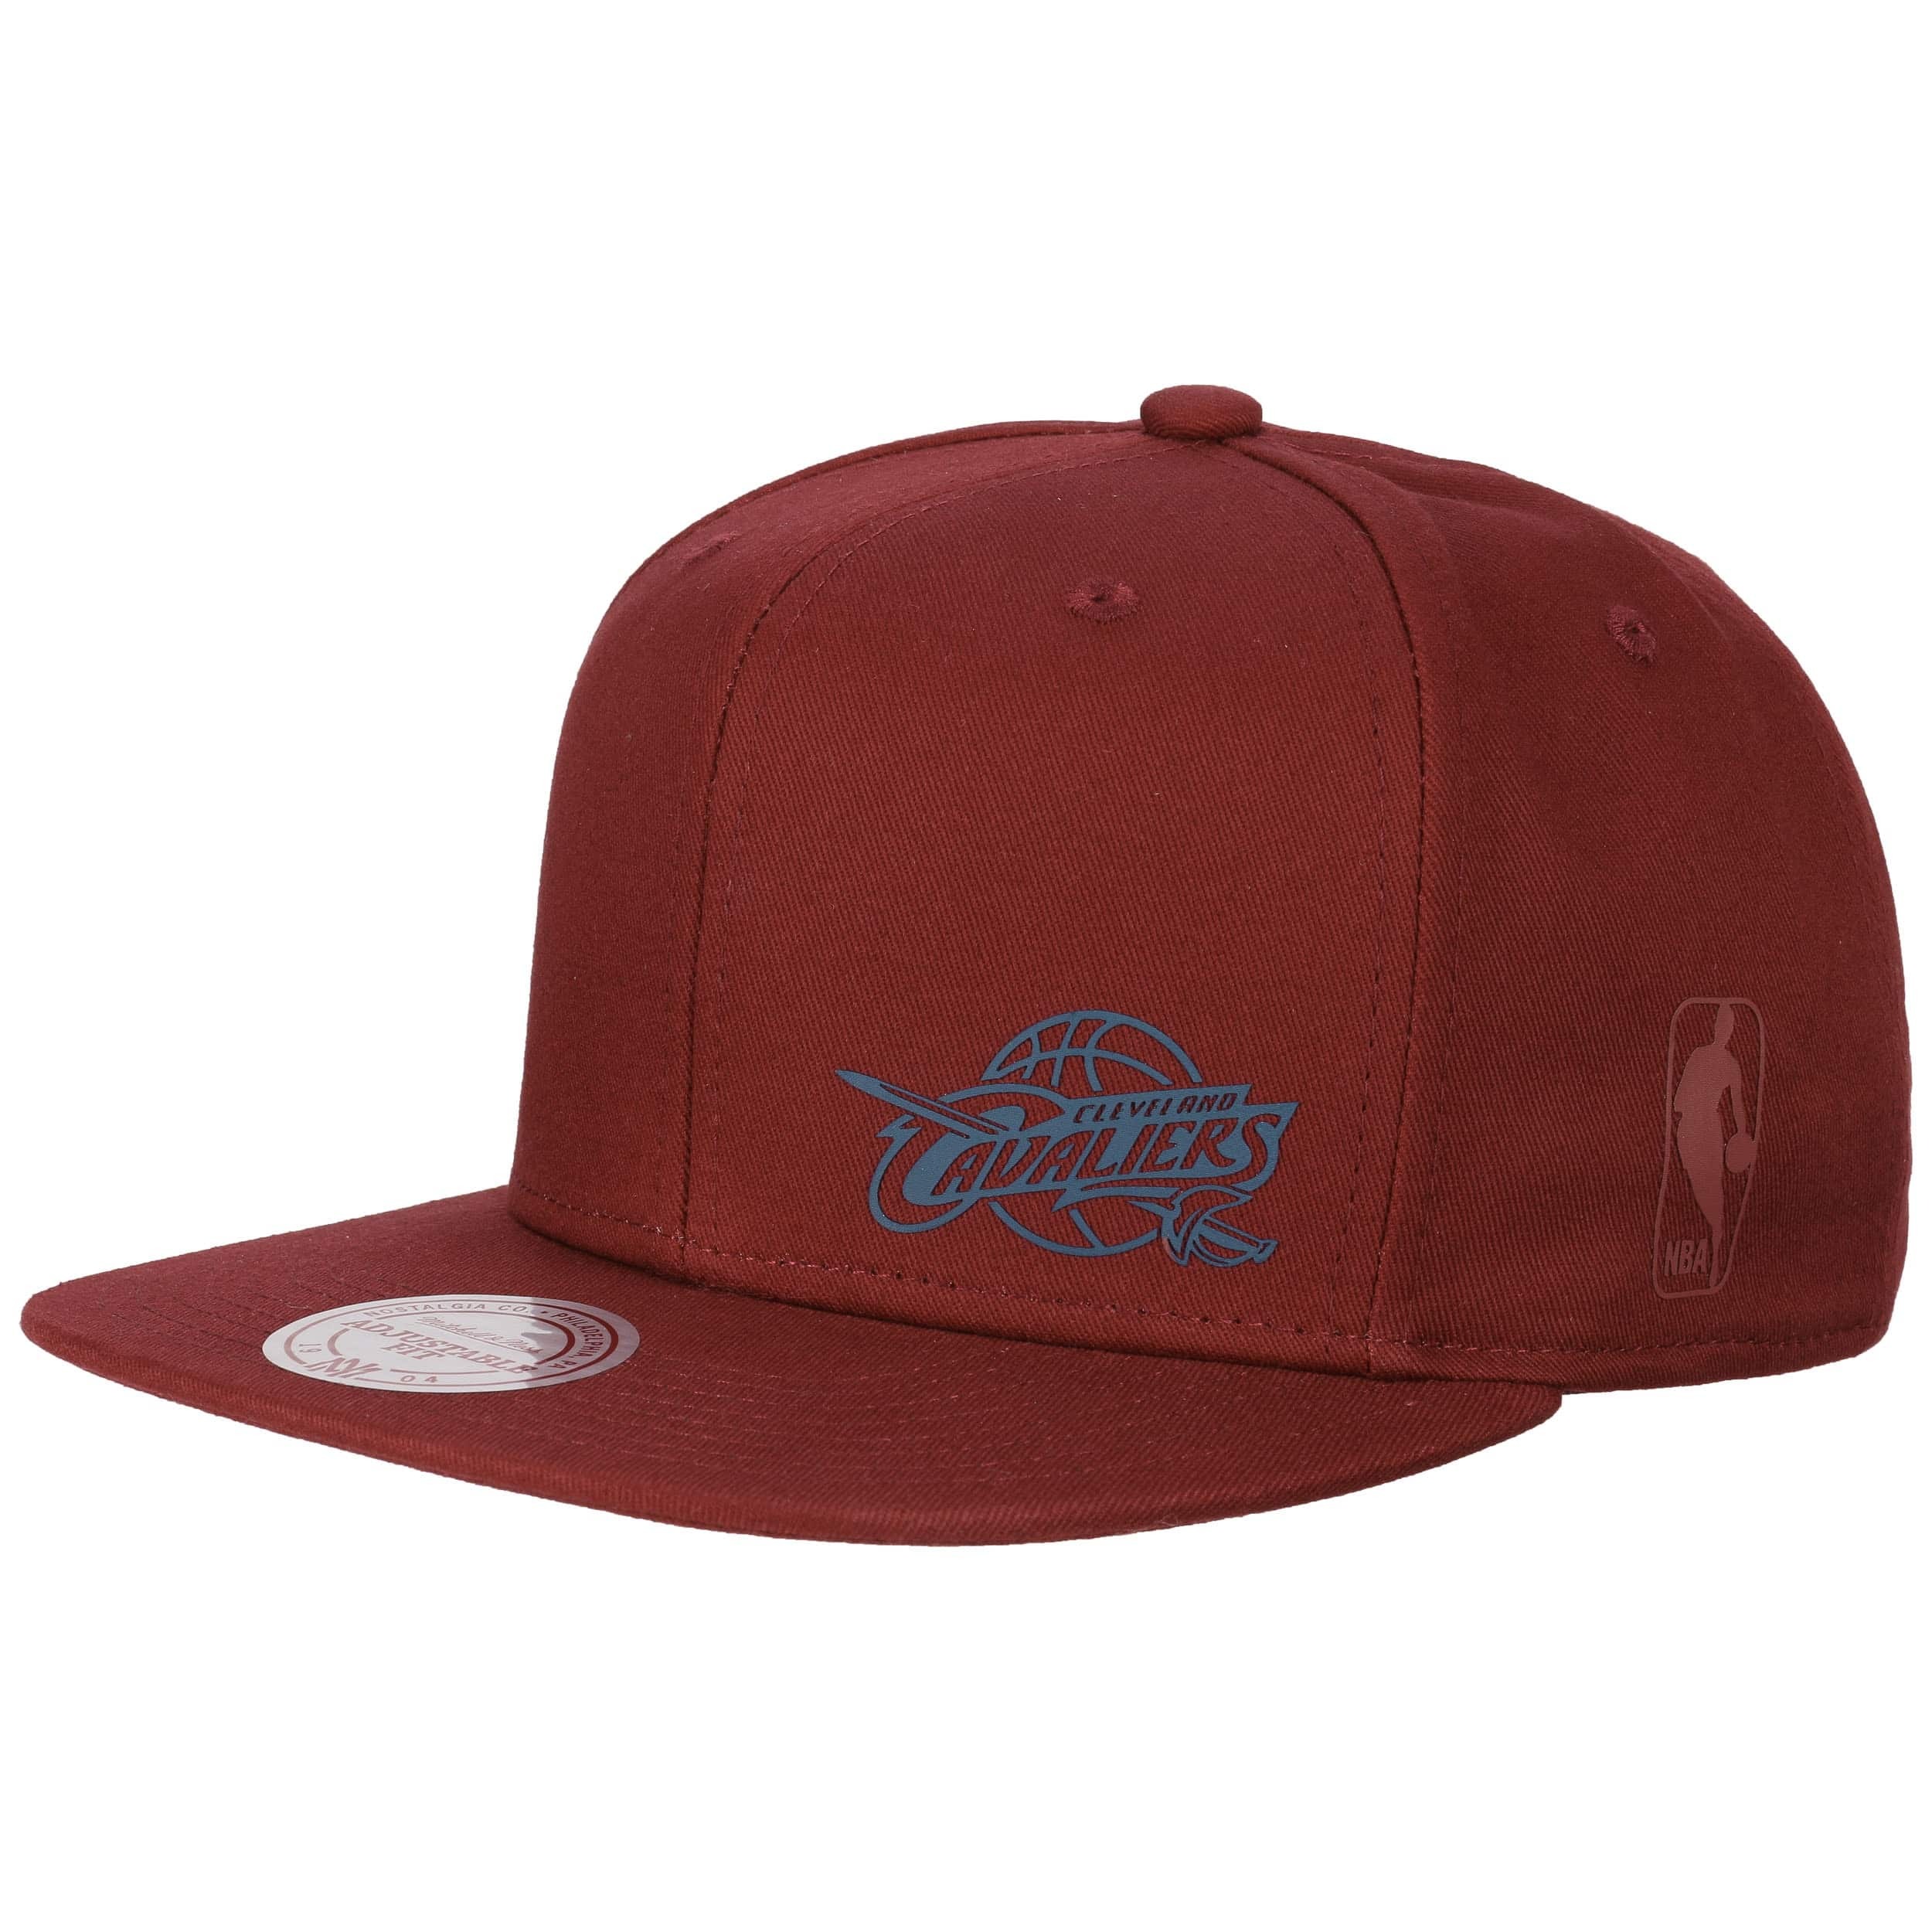 Absolute Cavs Cap by Mitchell & Ness - 28,95